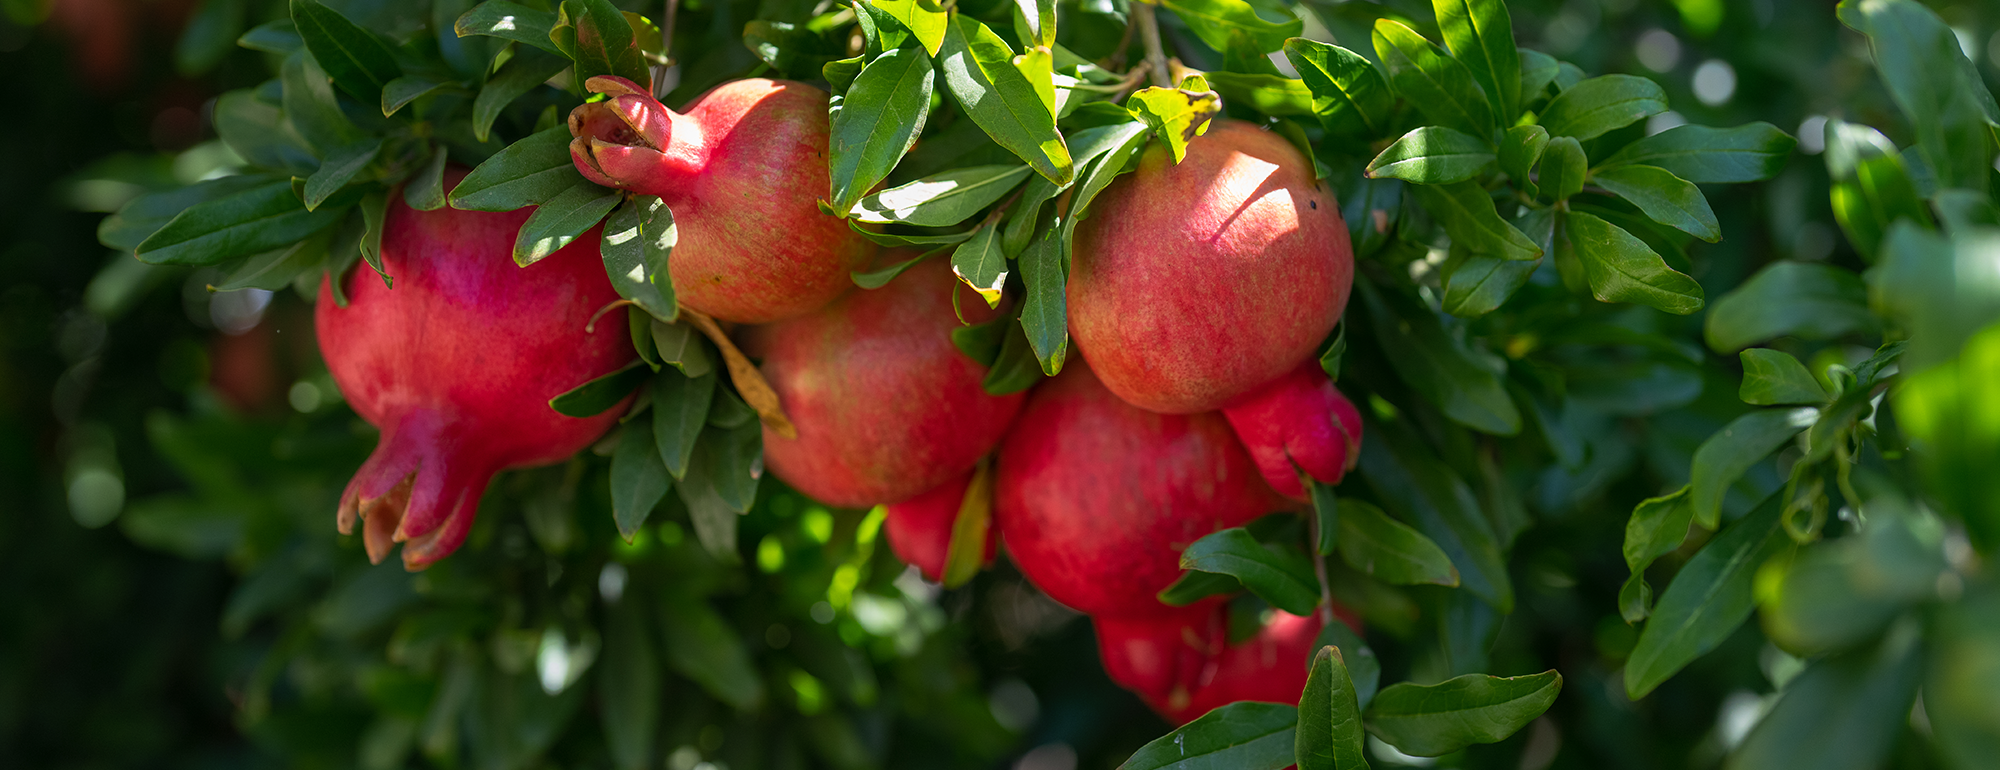 A group of pomegranates growing on a tree.